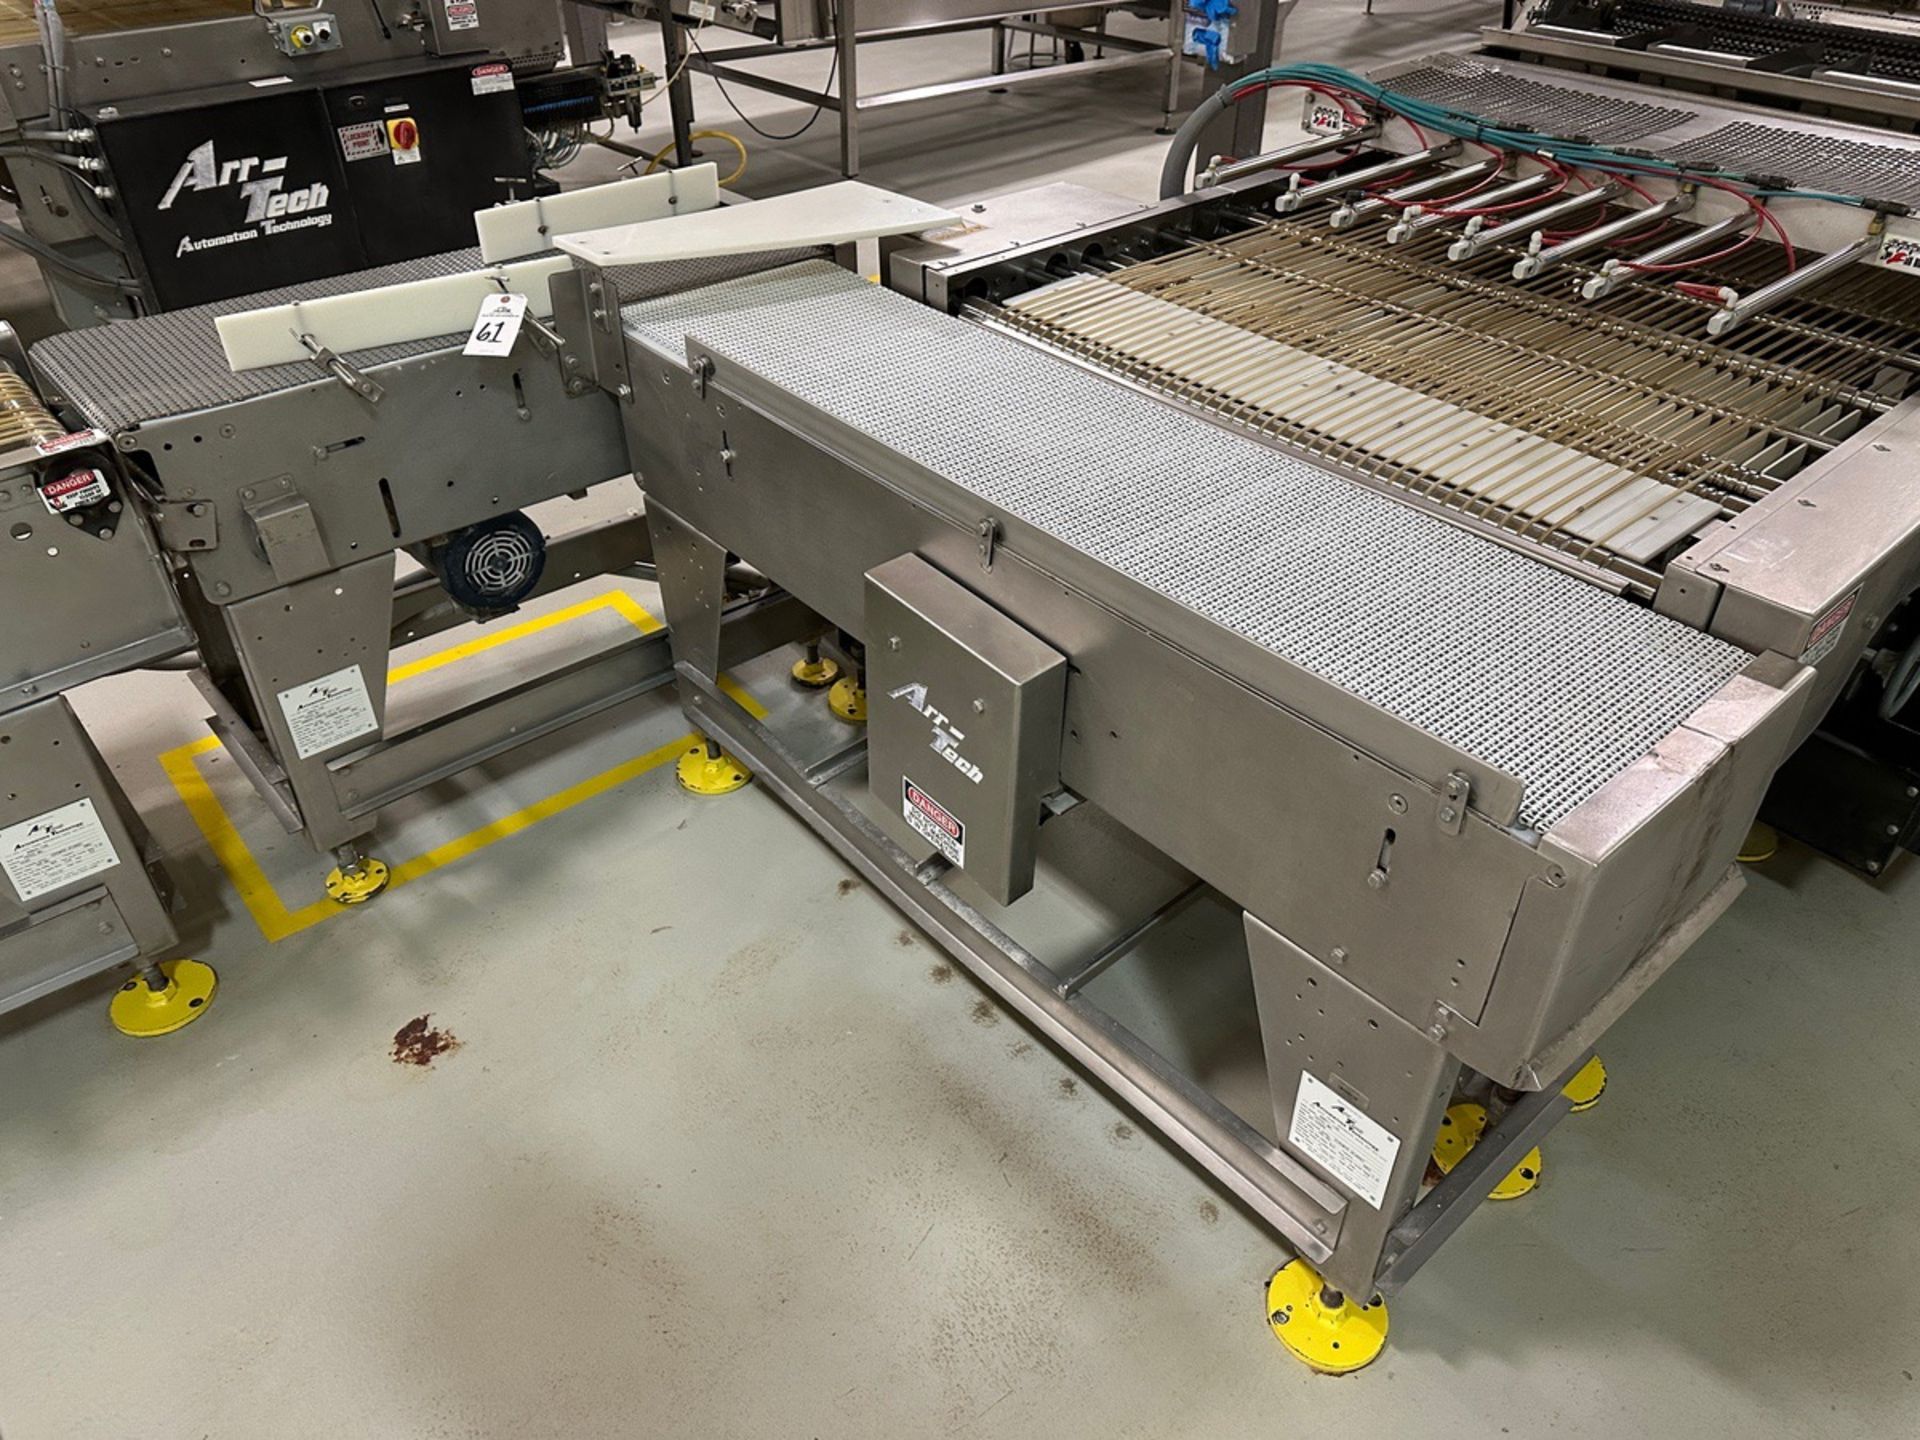 Lot of (2) Arr-Tech Intralox Belt over Stainless Steel Conveyors (Approx. 16" x 4' and 16" x 66")